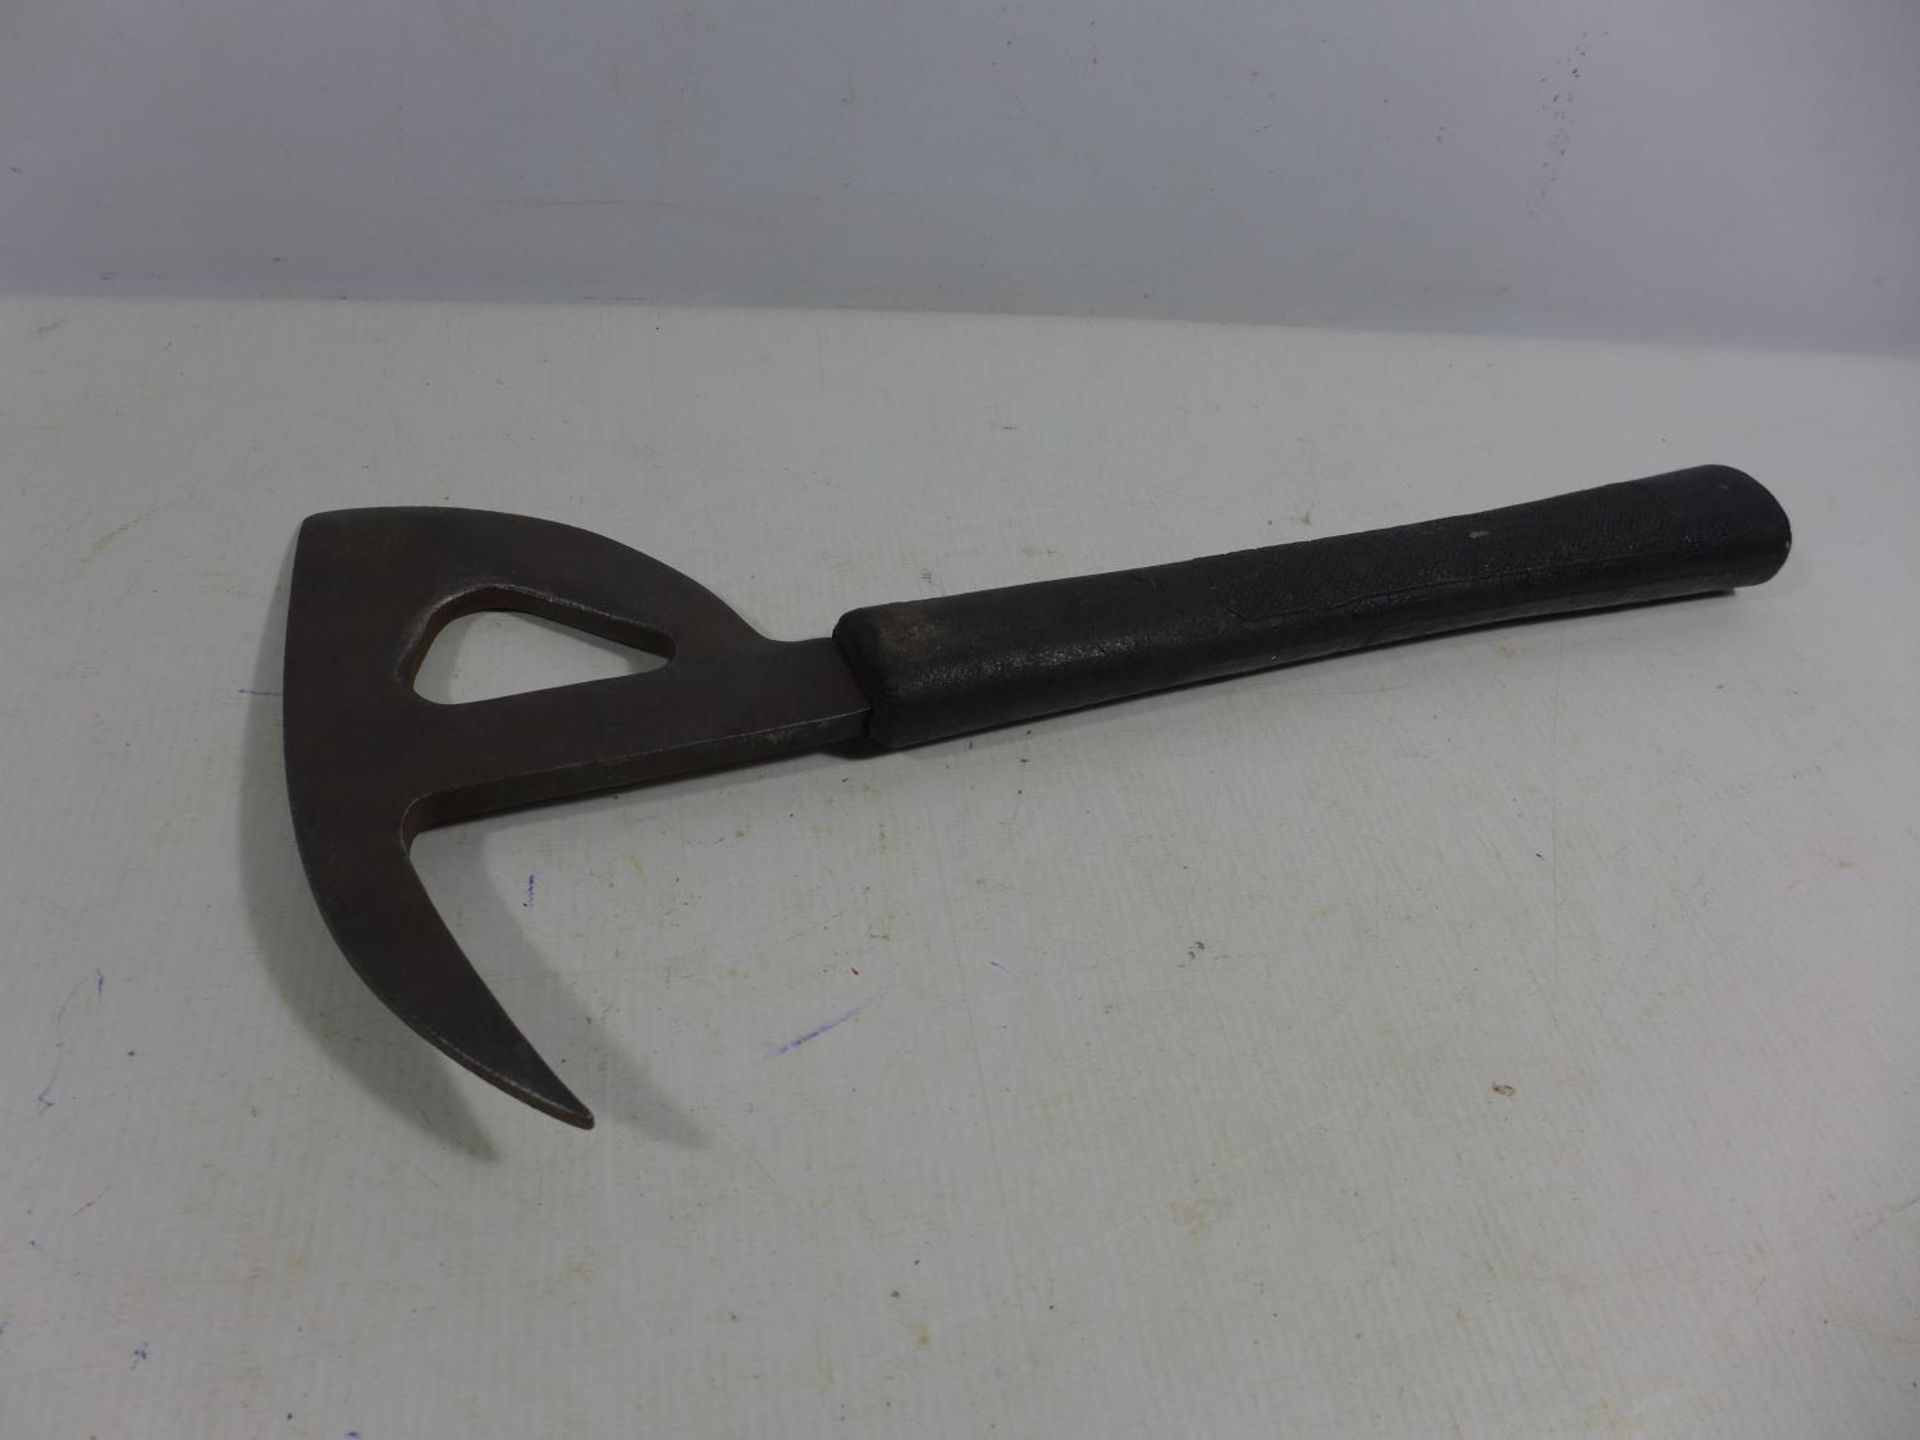 A WORLD WAR II AIR MINISTRY ESCAPE AXE, DATED 1939, LENGTH 40CM - Image 3 of 3